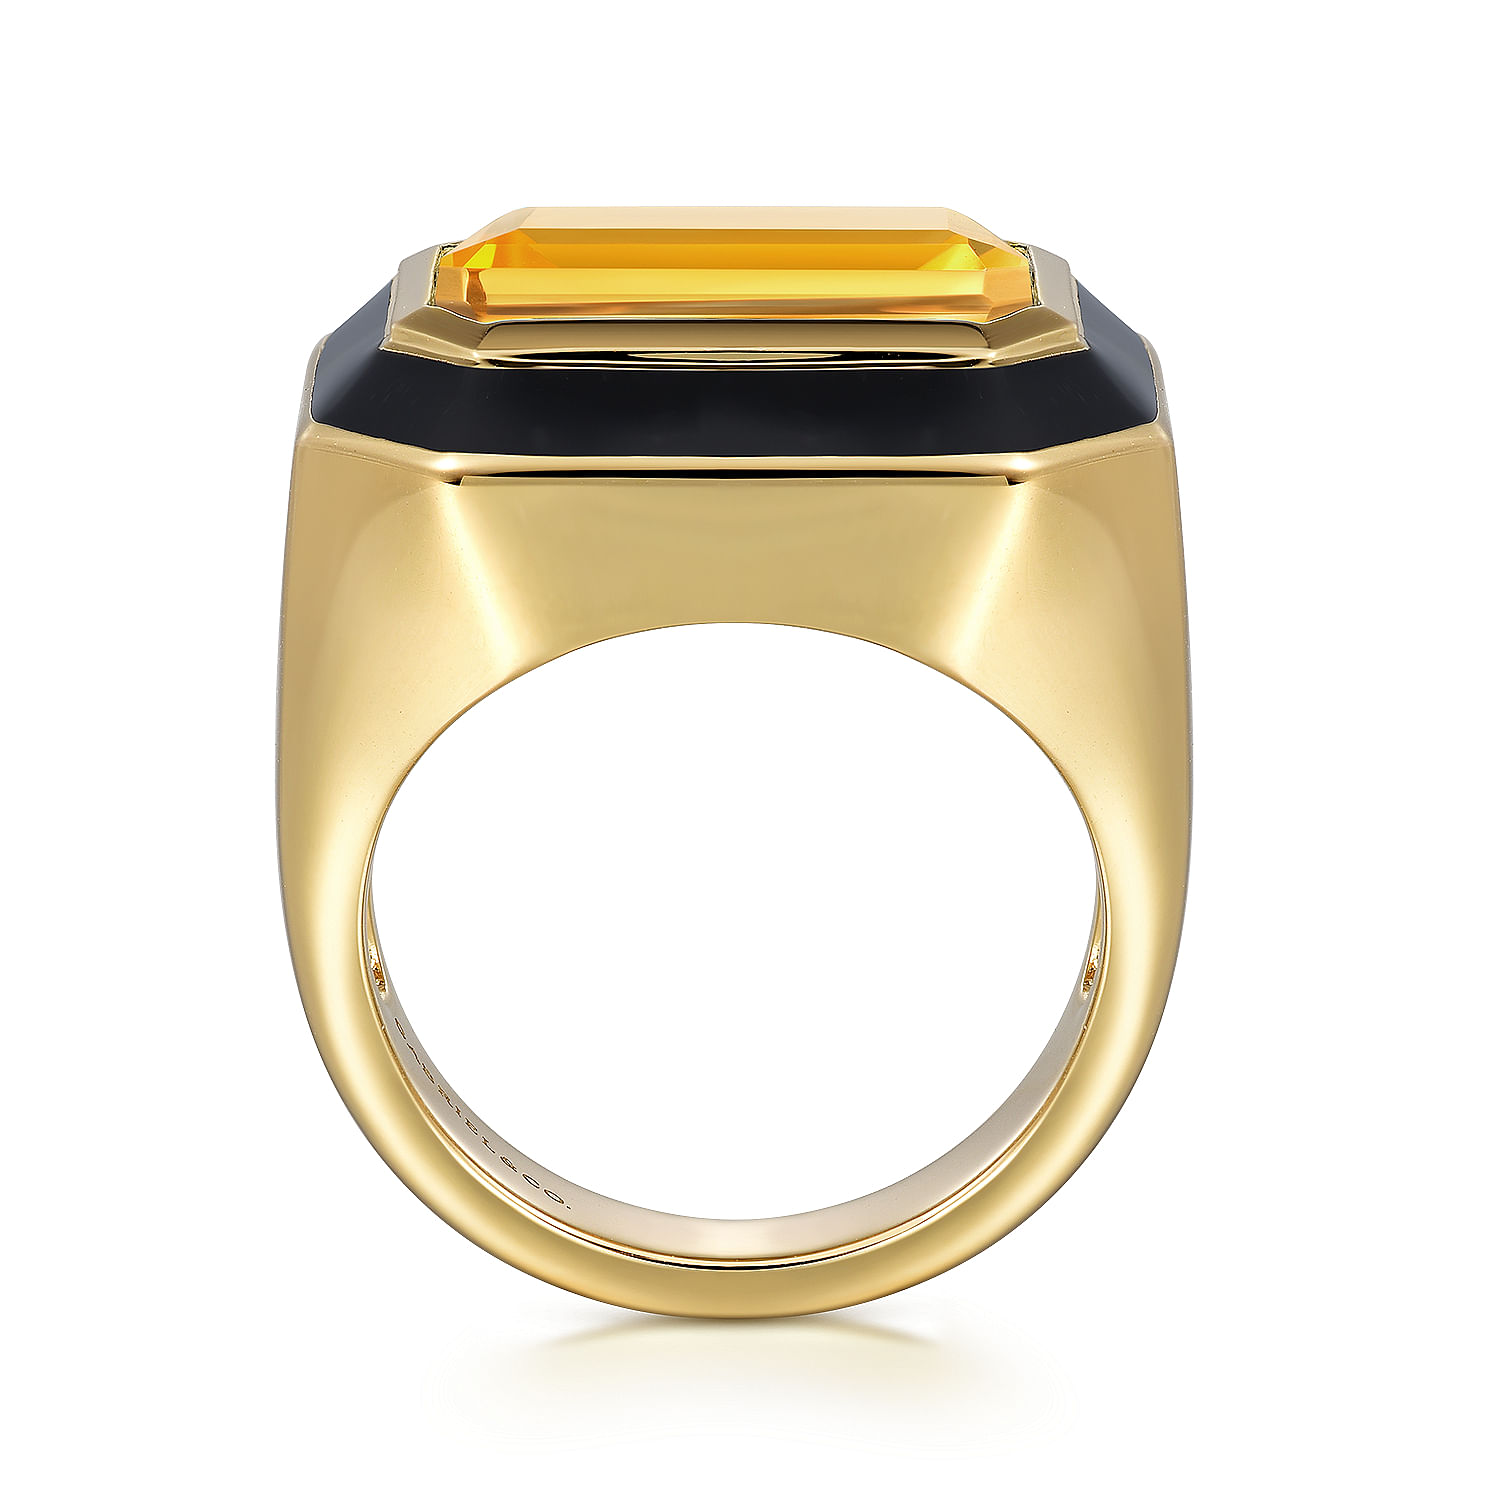 14K Yellow Gold Citrine Emerald Cut Ladies Ring With Flower Pattern J-Back and Black Enamel